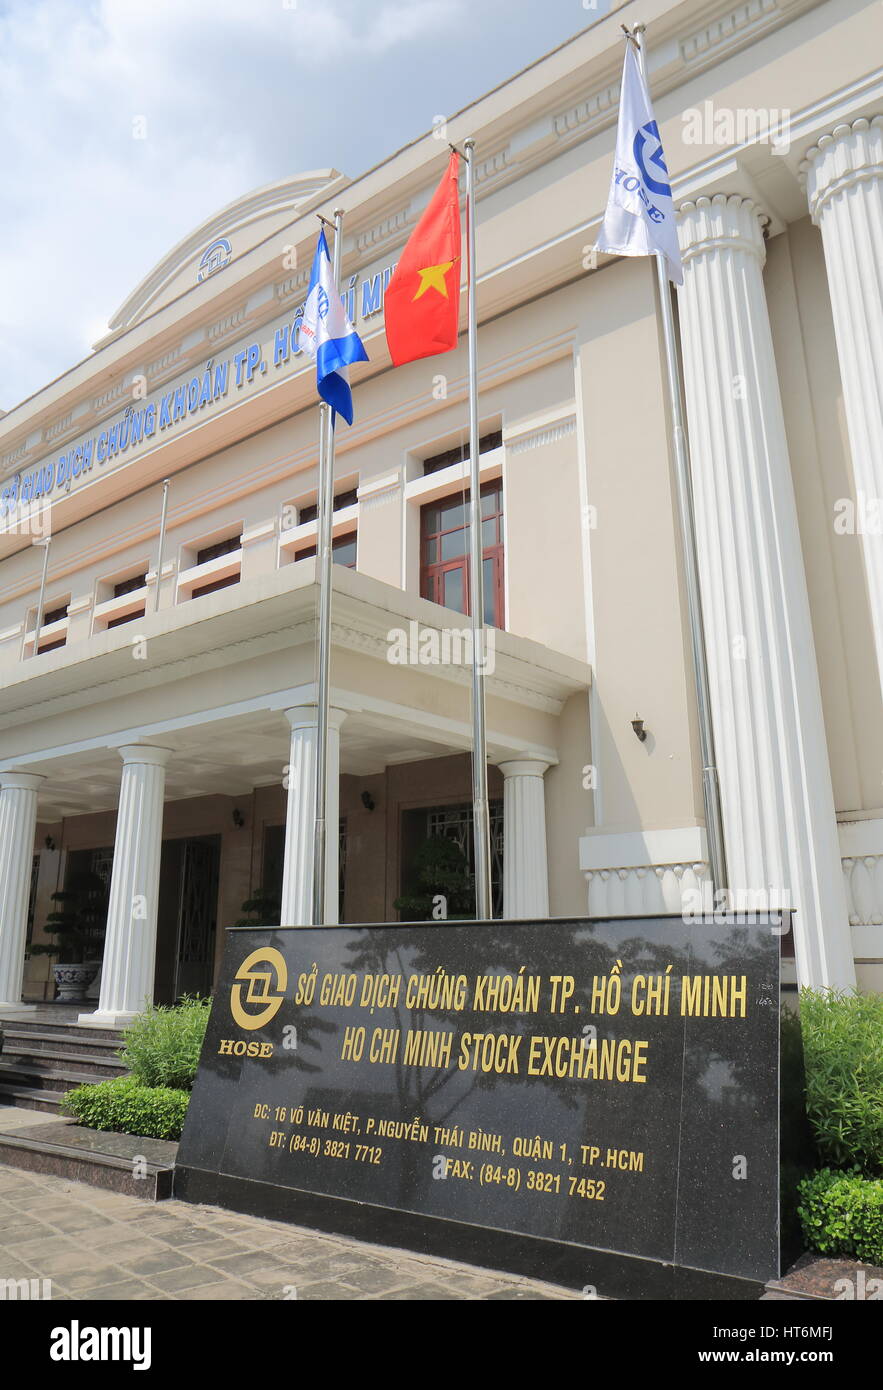 Ho Chi Minh Stock Exchange building in Ho Chi Minh City Vietnam. Stock Photo